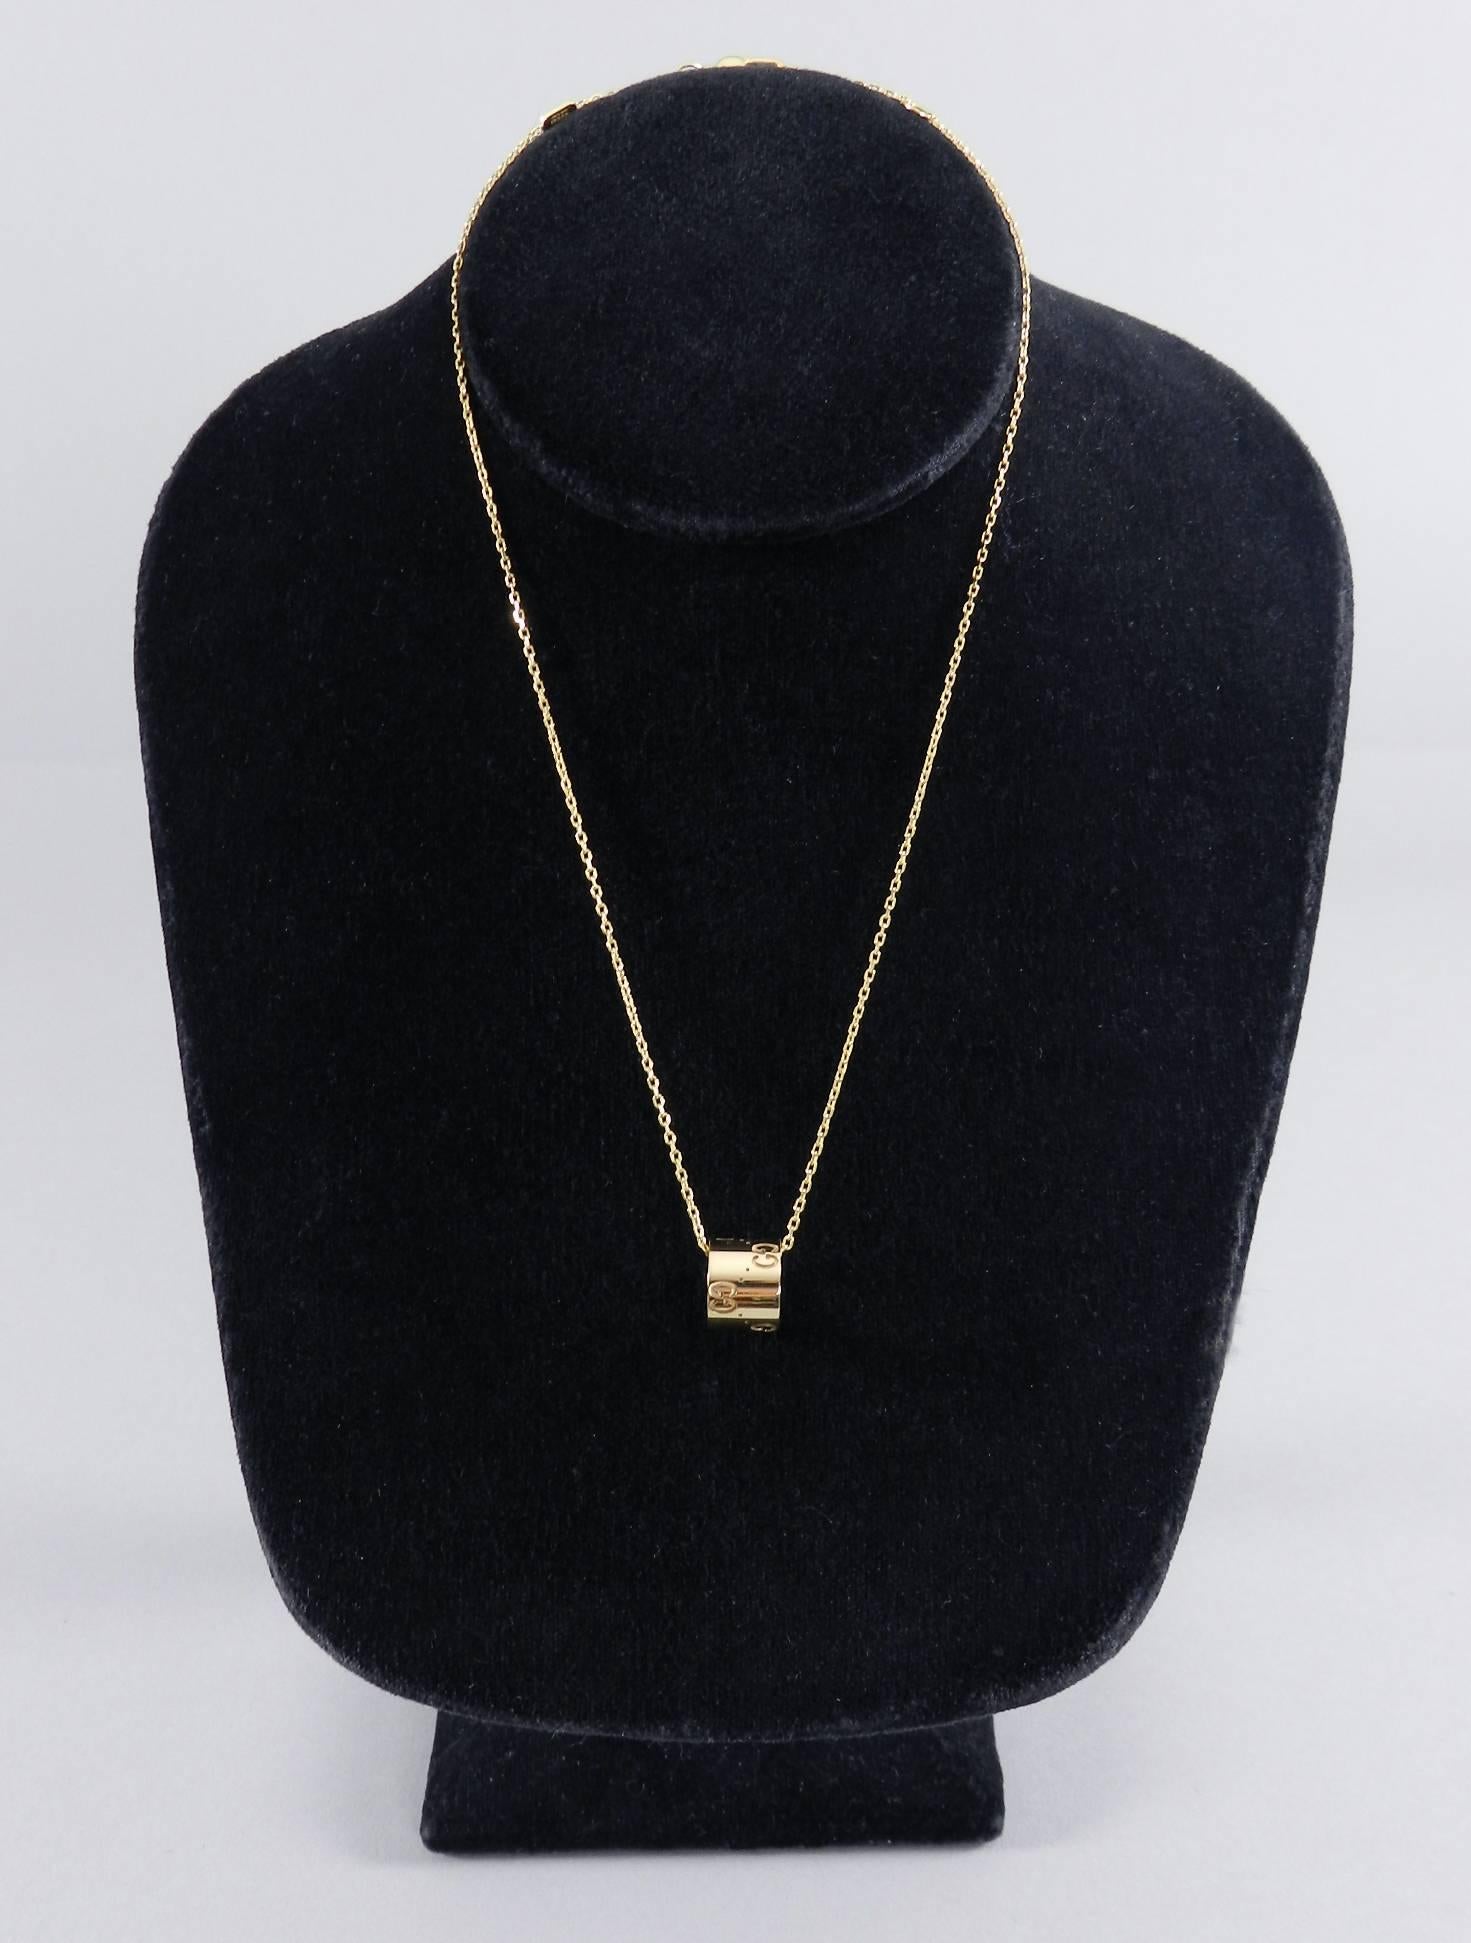 Gucci 18k yellow gold Icon necklace. GG logo on pendant. Made in Italy.  Chain fastens at 15” and 16”.

We ship worldwide.
